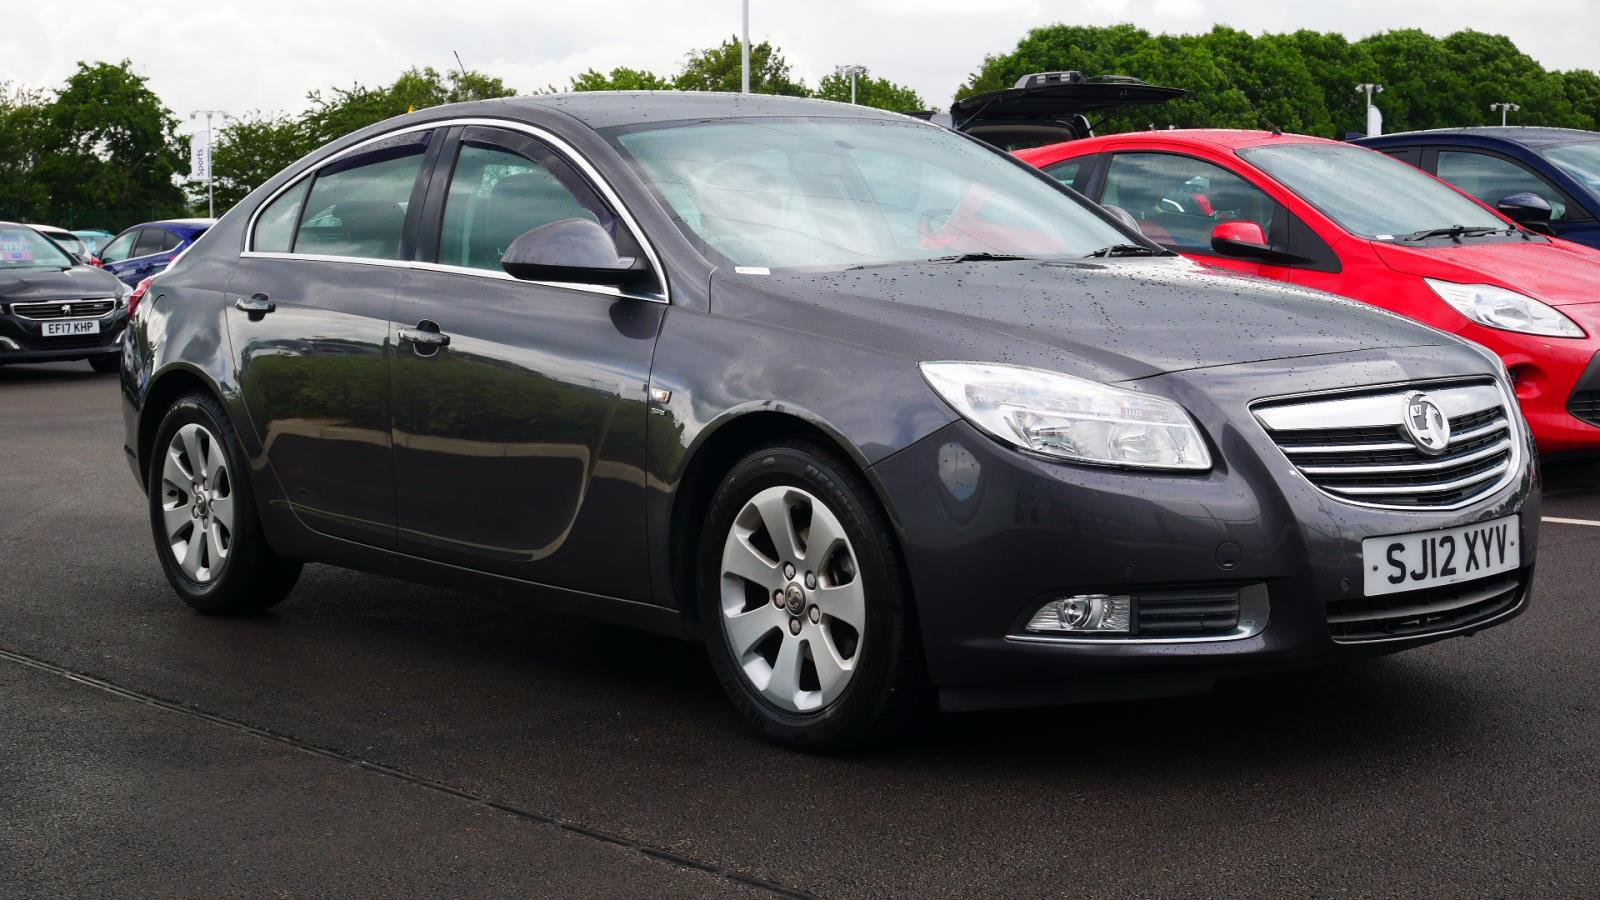 Used Vauxhall Insignia Cars for Sale CarShop CarShop